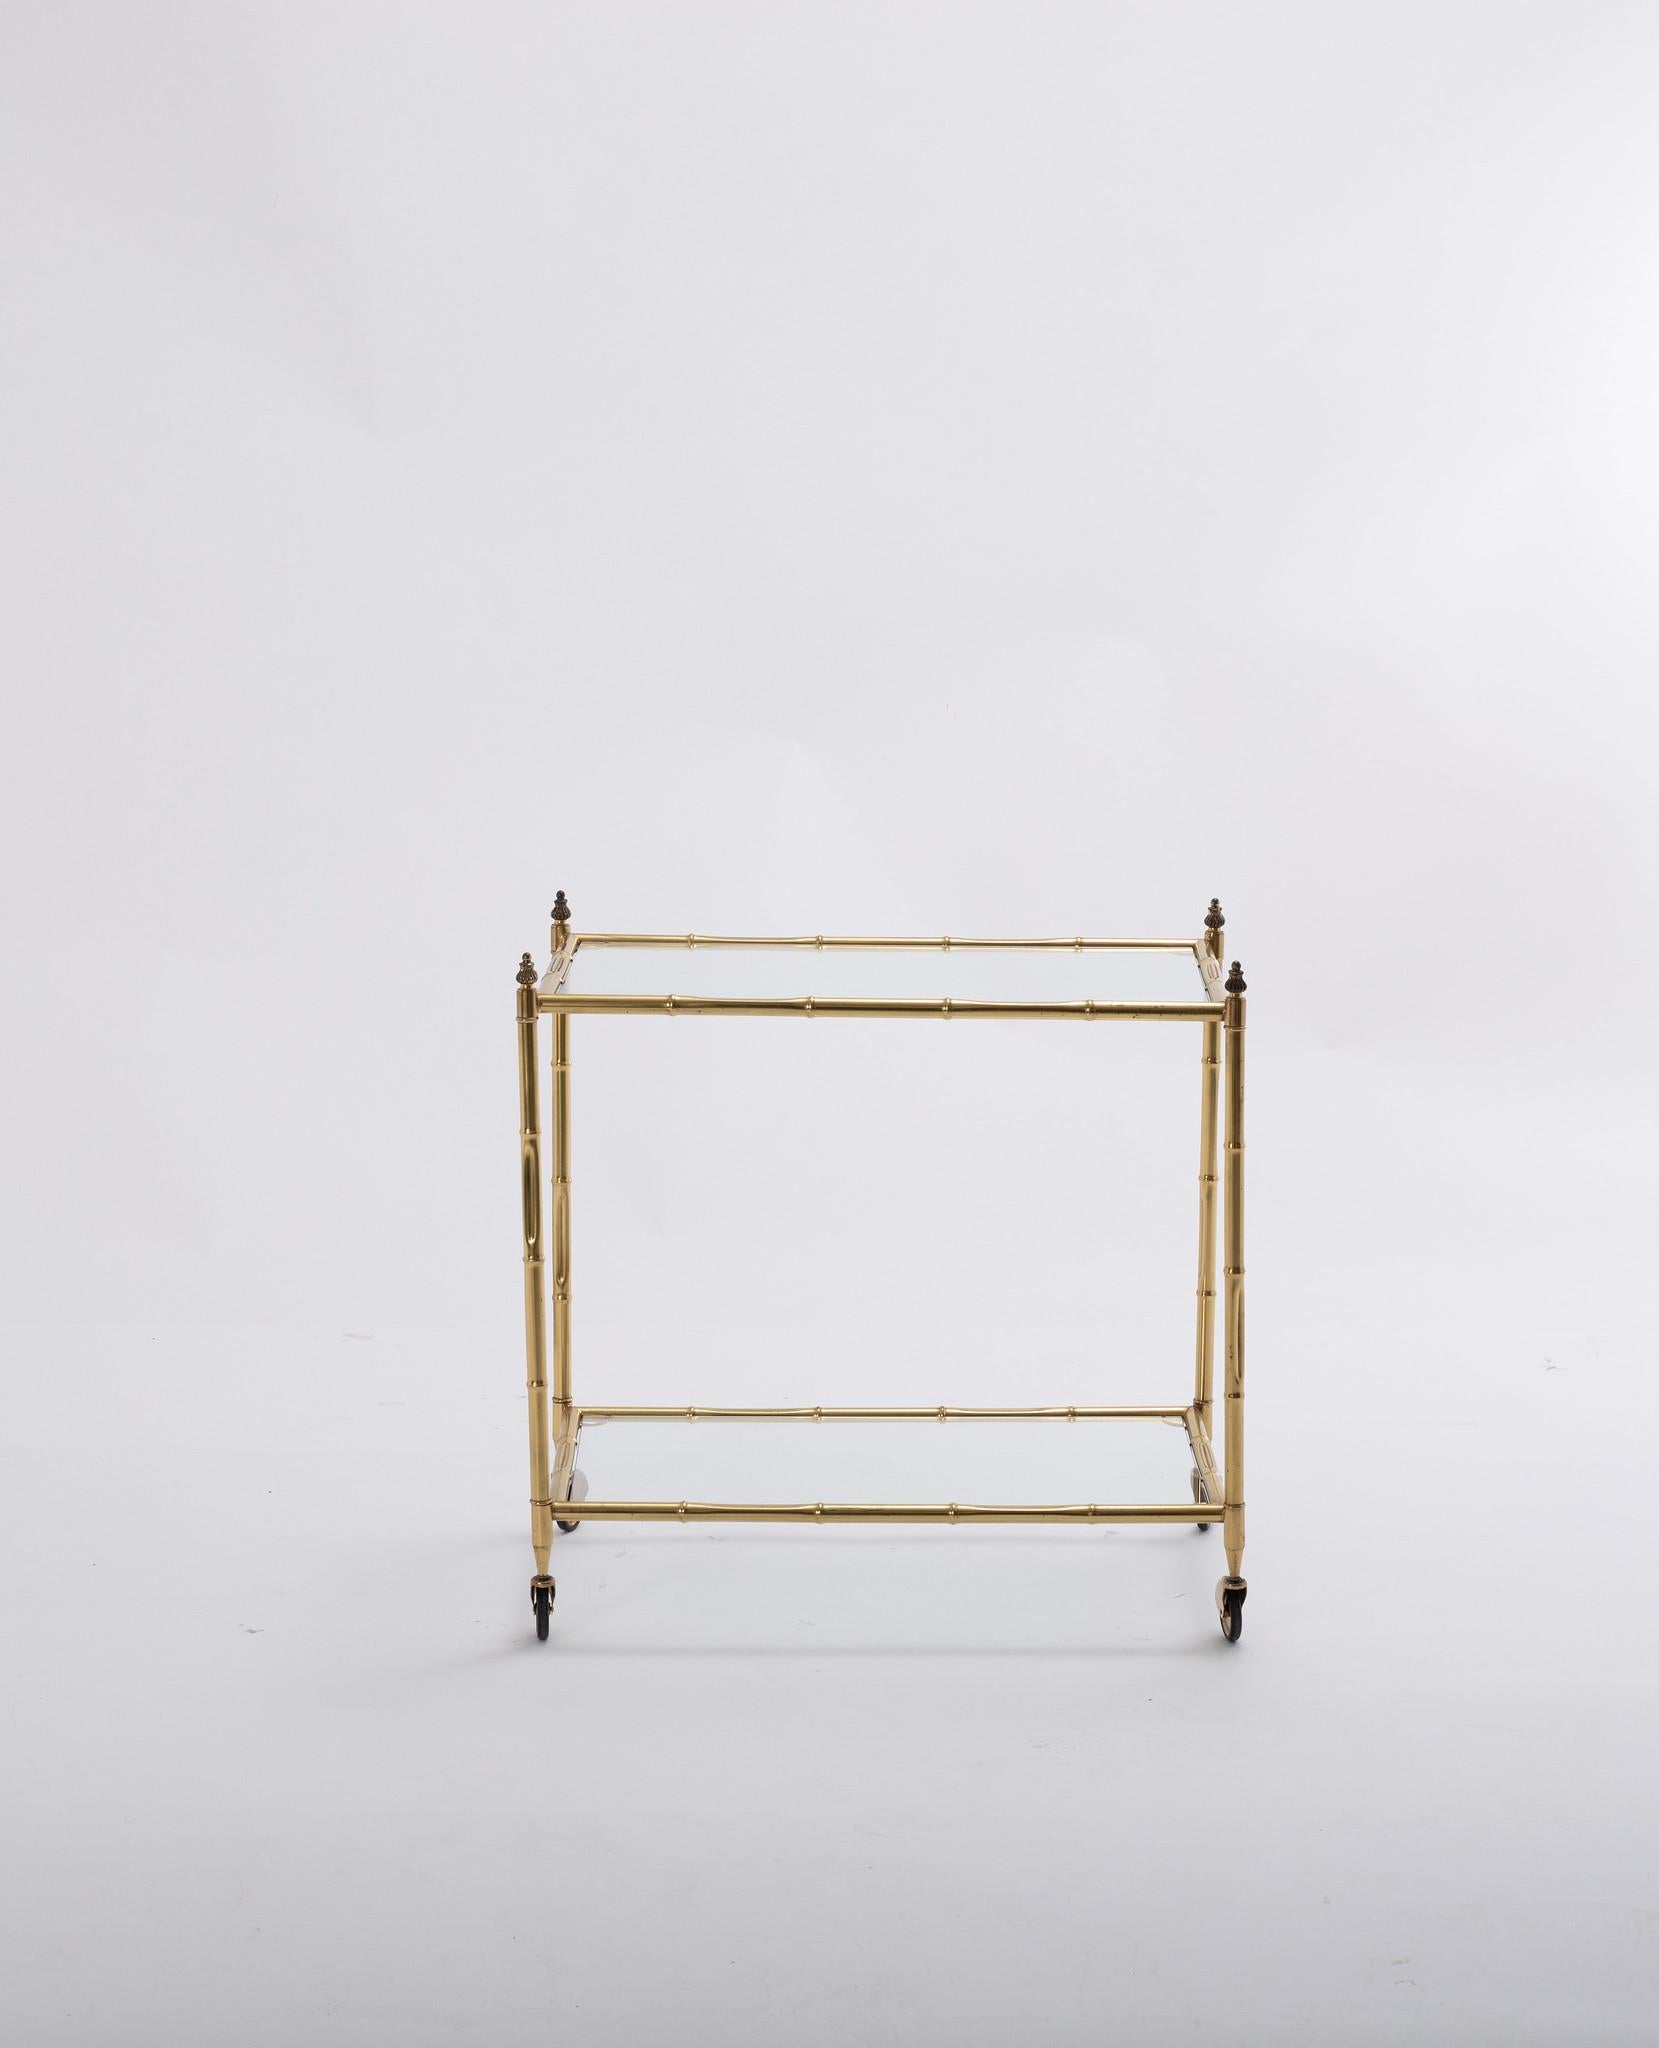 Vintage 1940s Jansen style brass bar cart with two glass shelves.